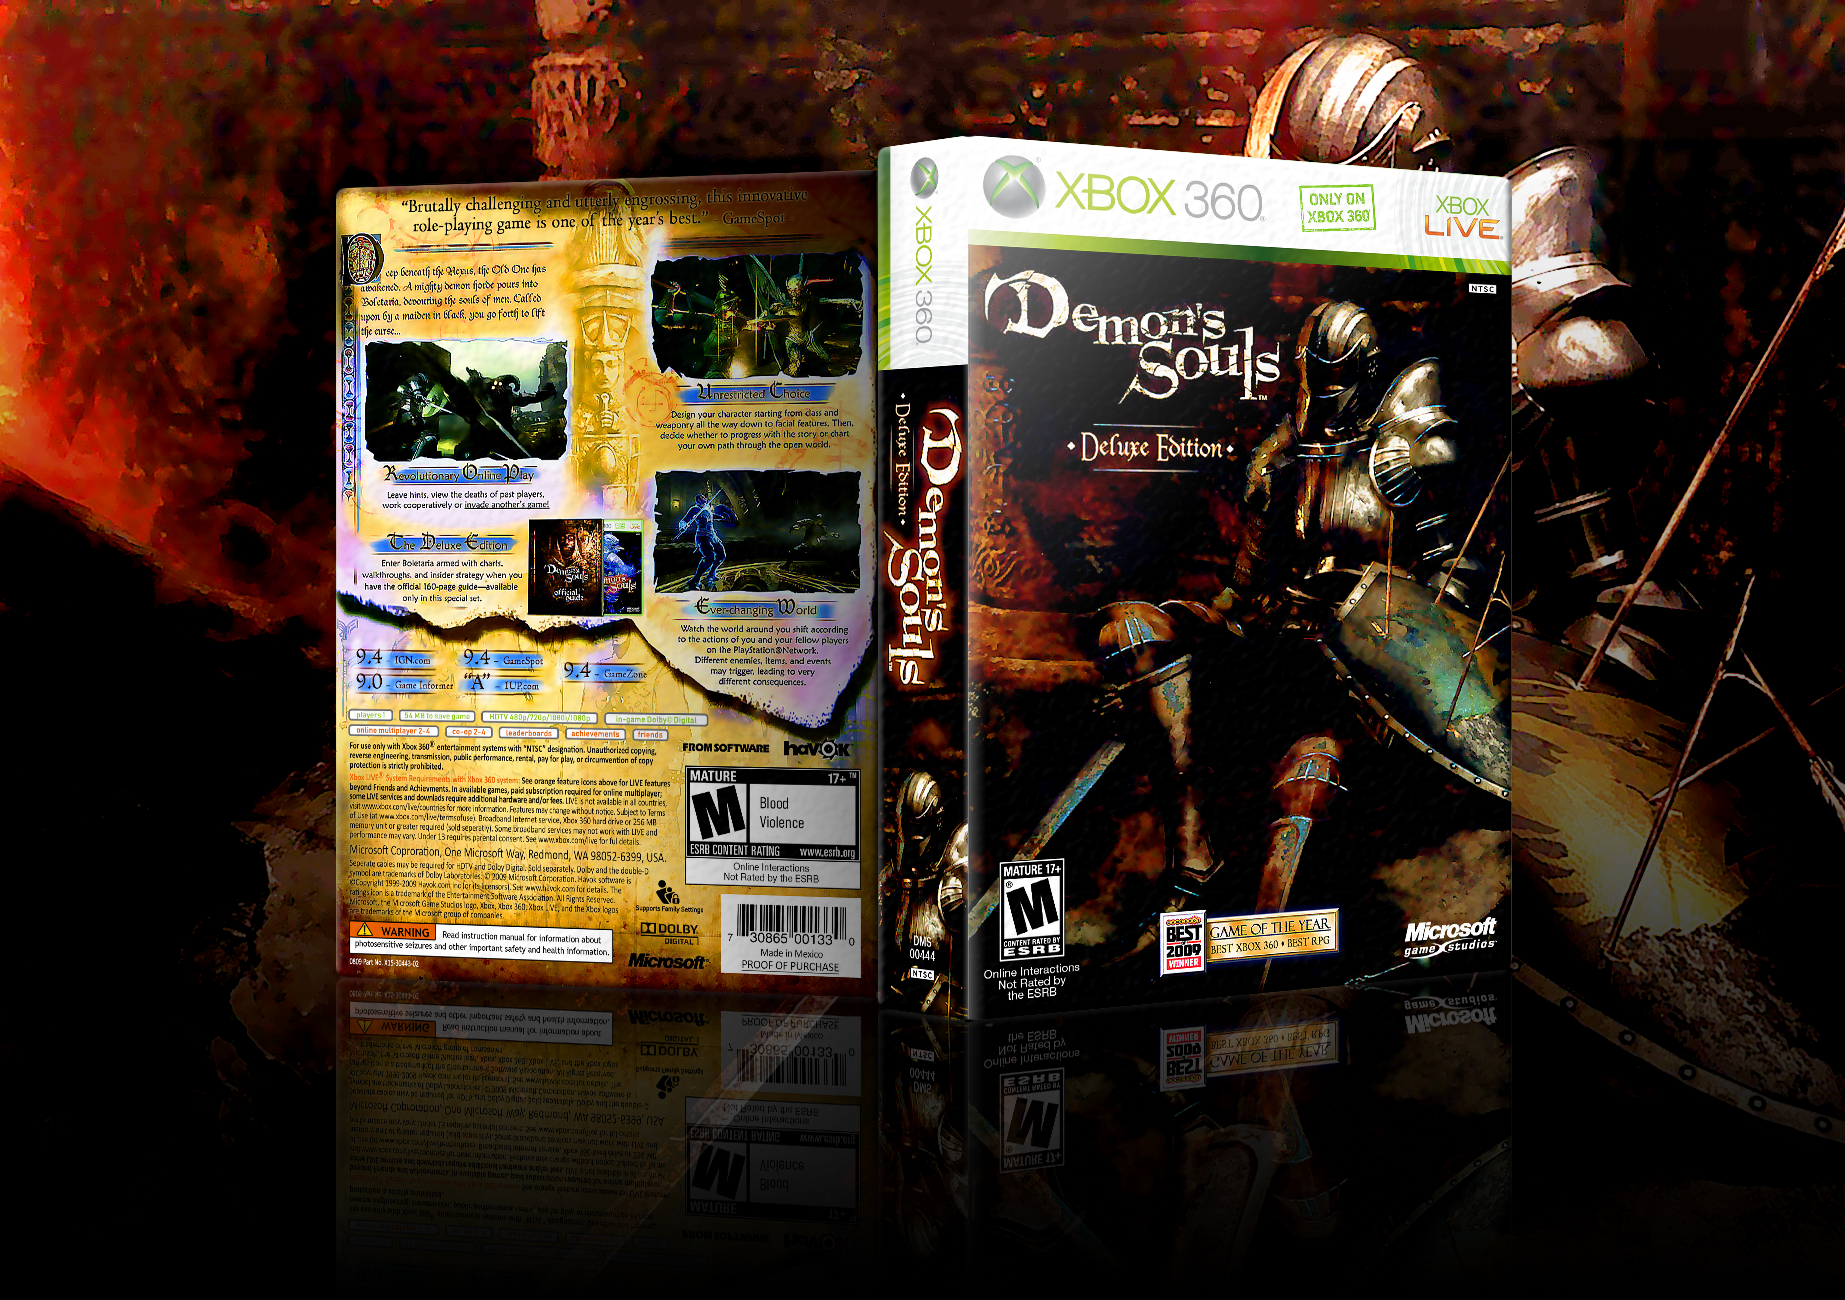 Demon's Souls: Deluxe Edition box cover